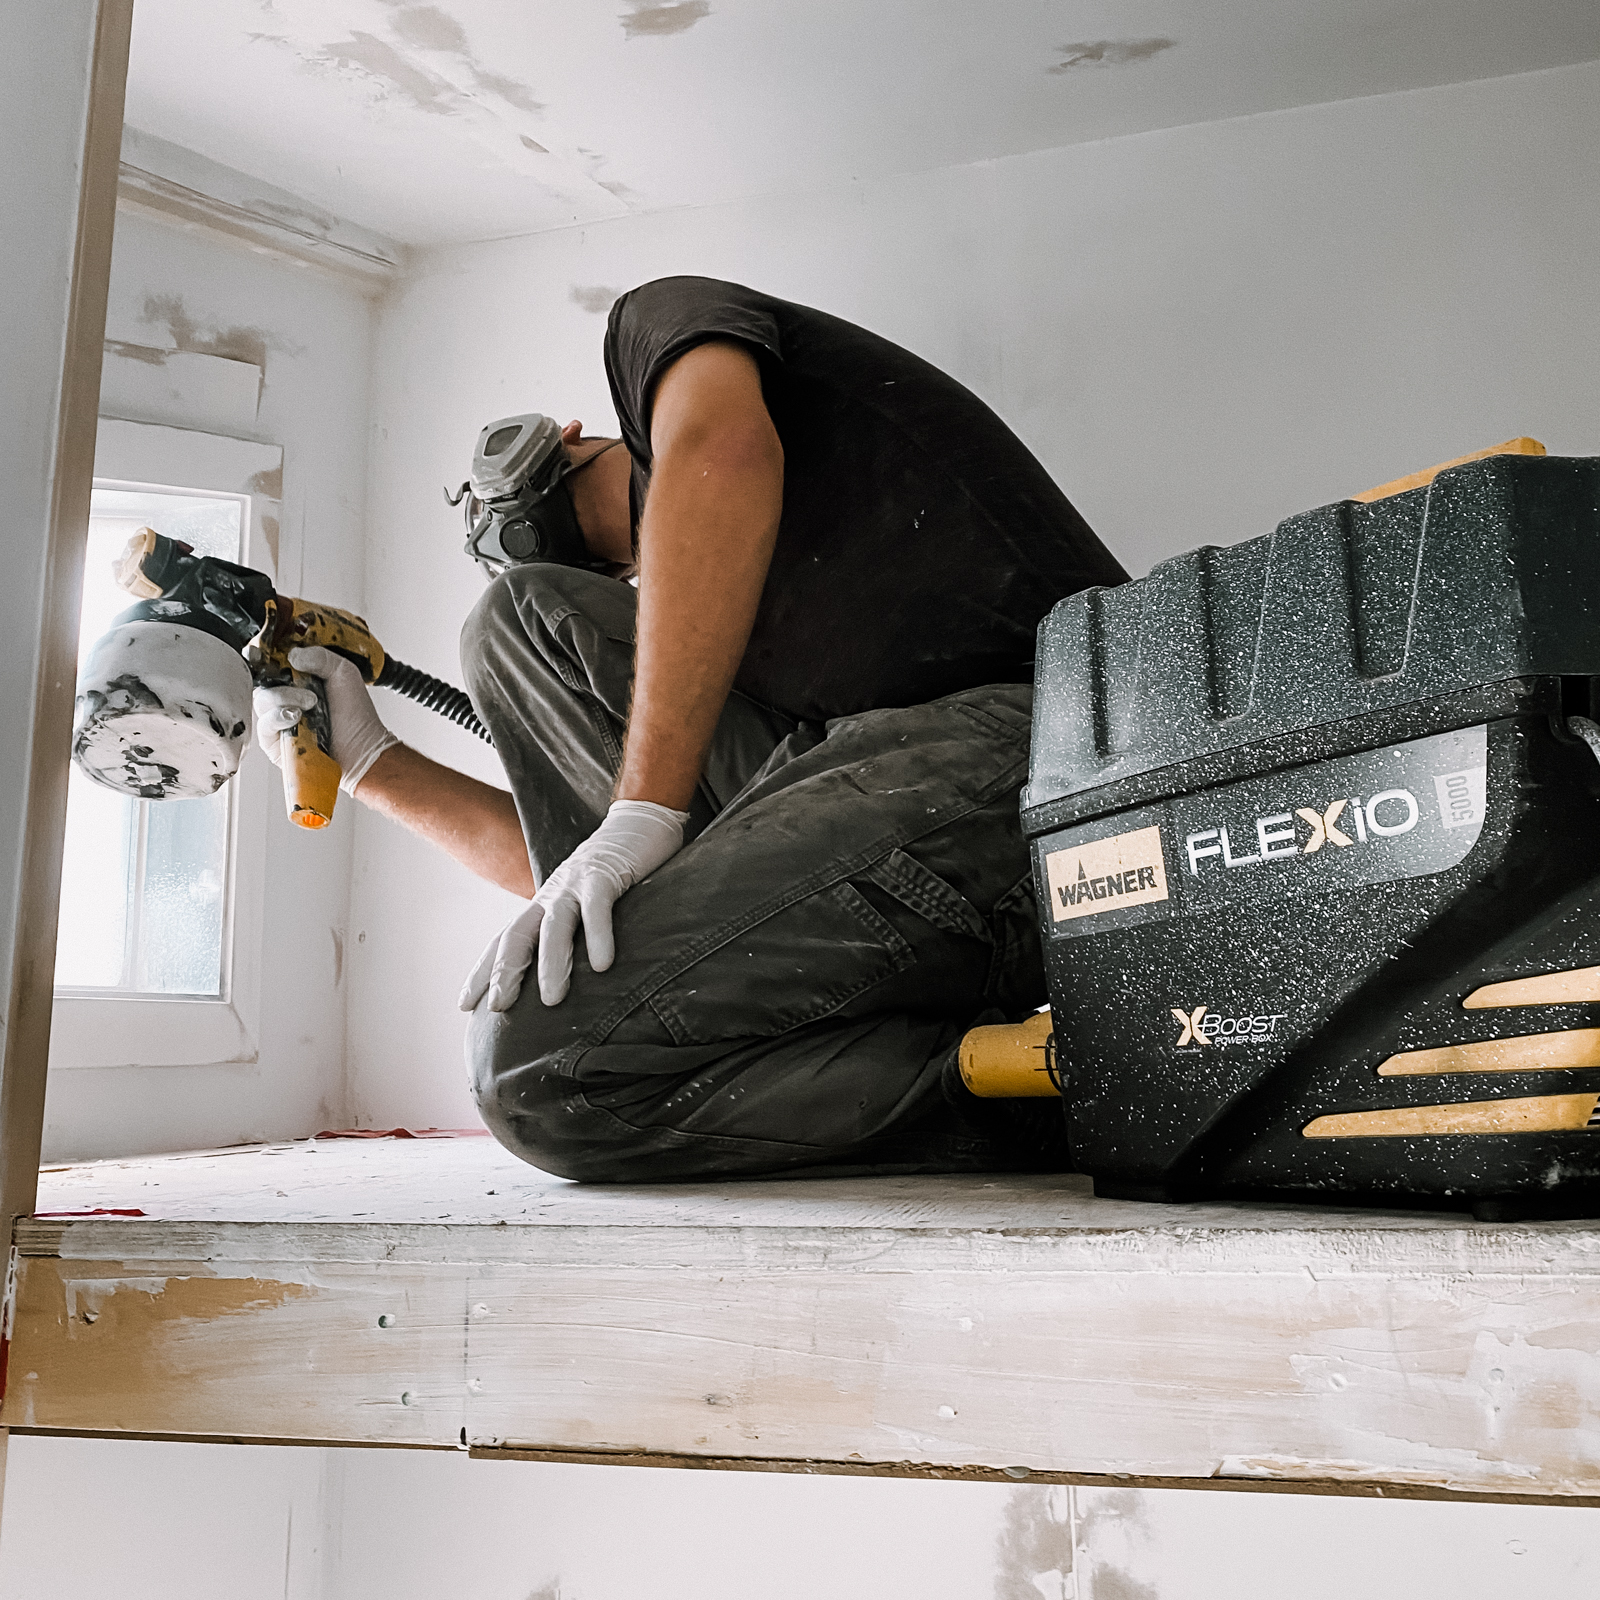 Using the flexio 5000 to paint the playhouse interior